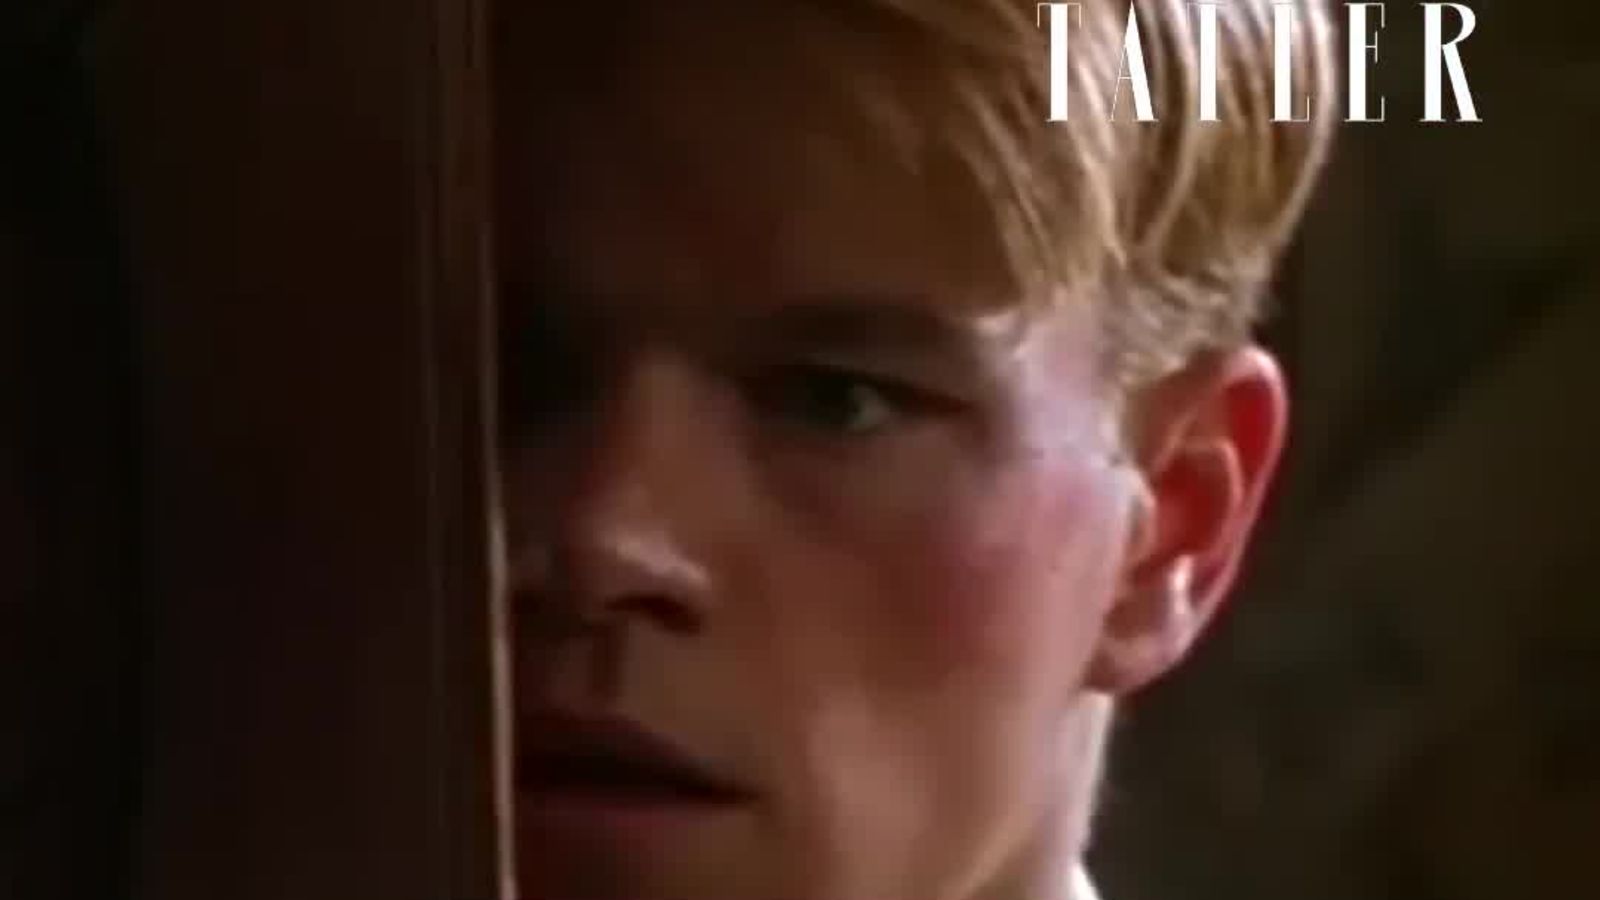 'The Talented Mr. Ripley' Returns... But Not As We Know It